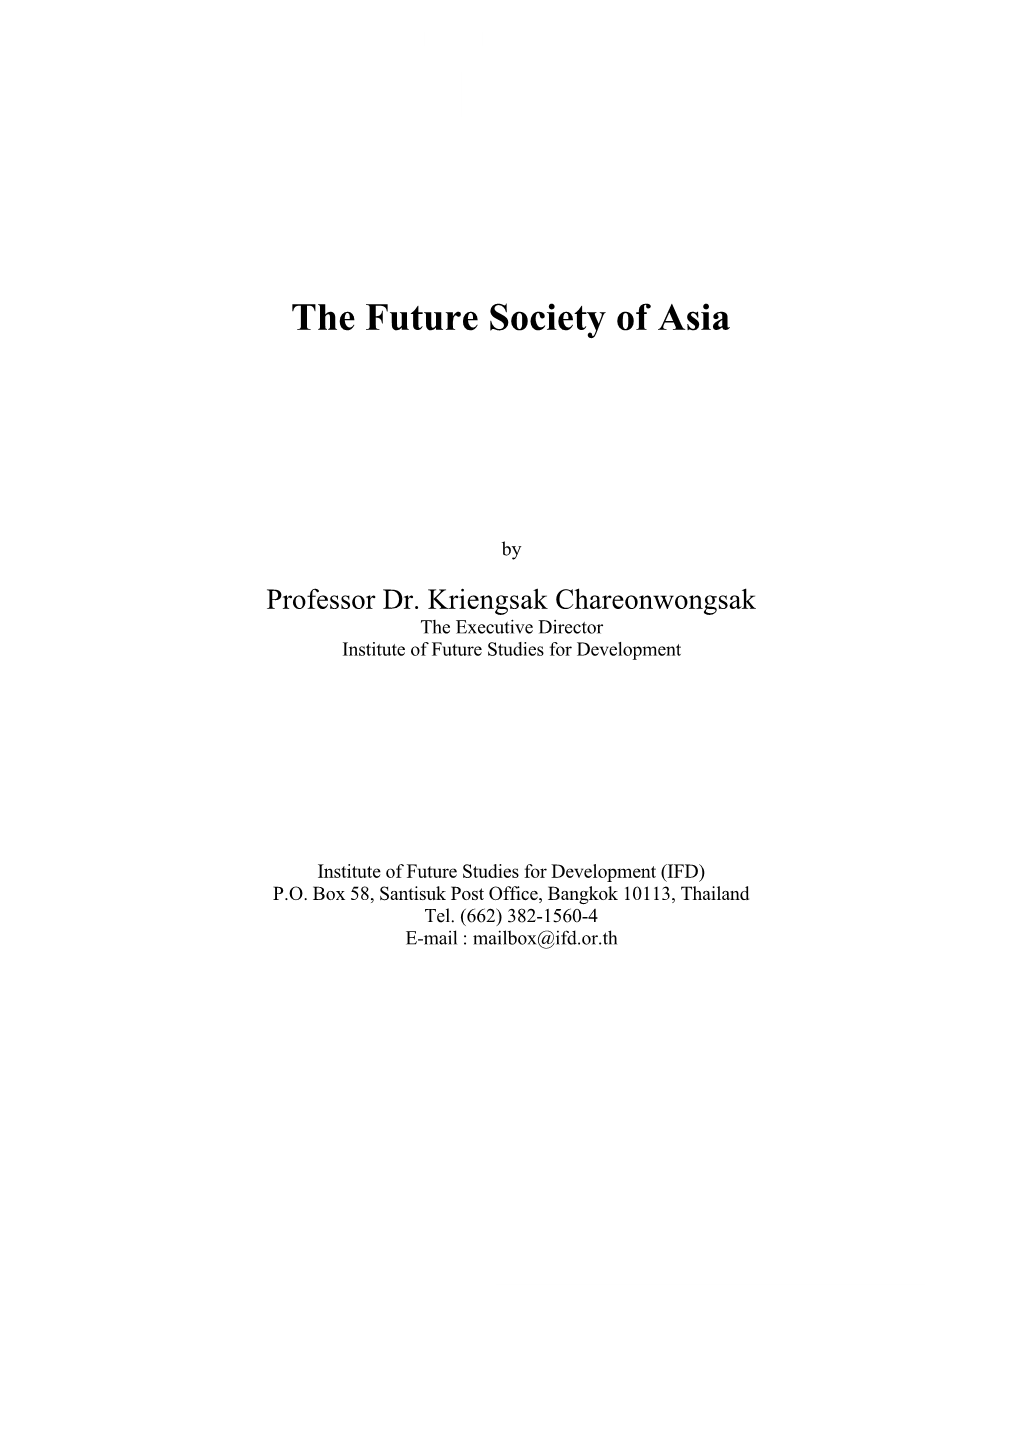 The Future Society of Asia